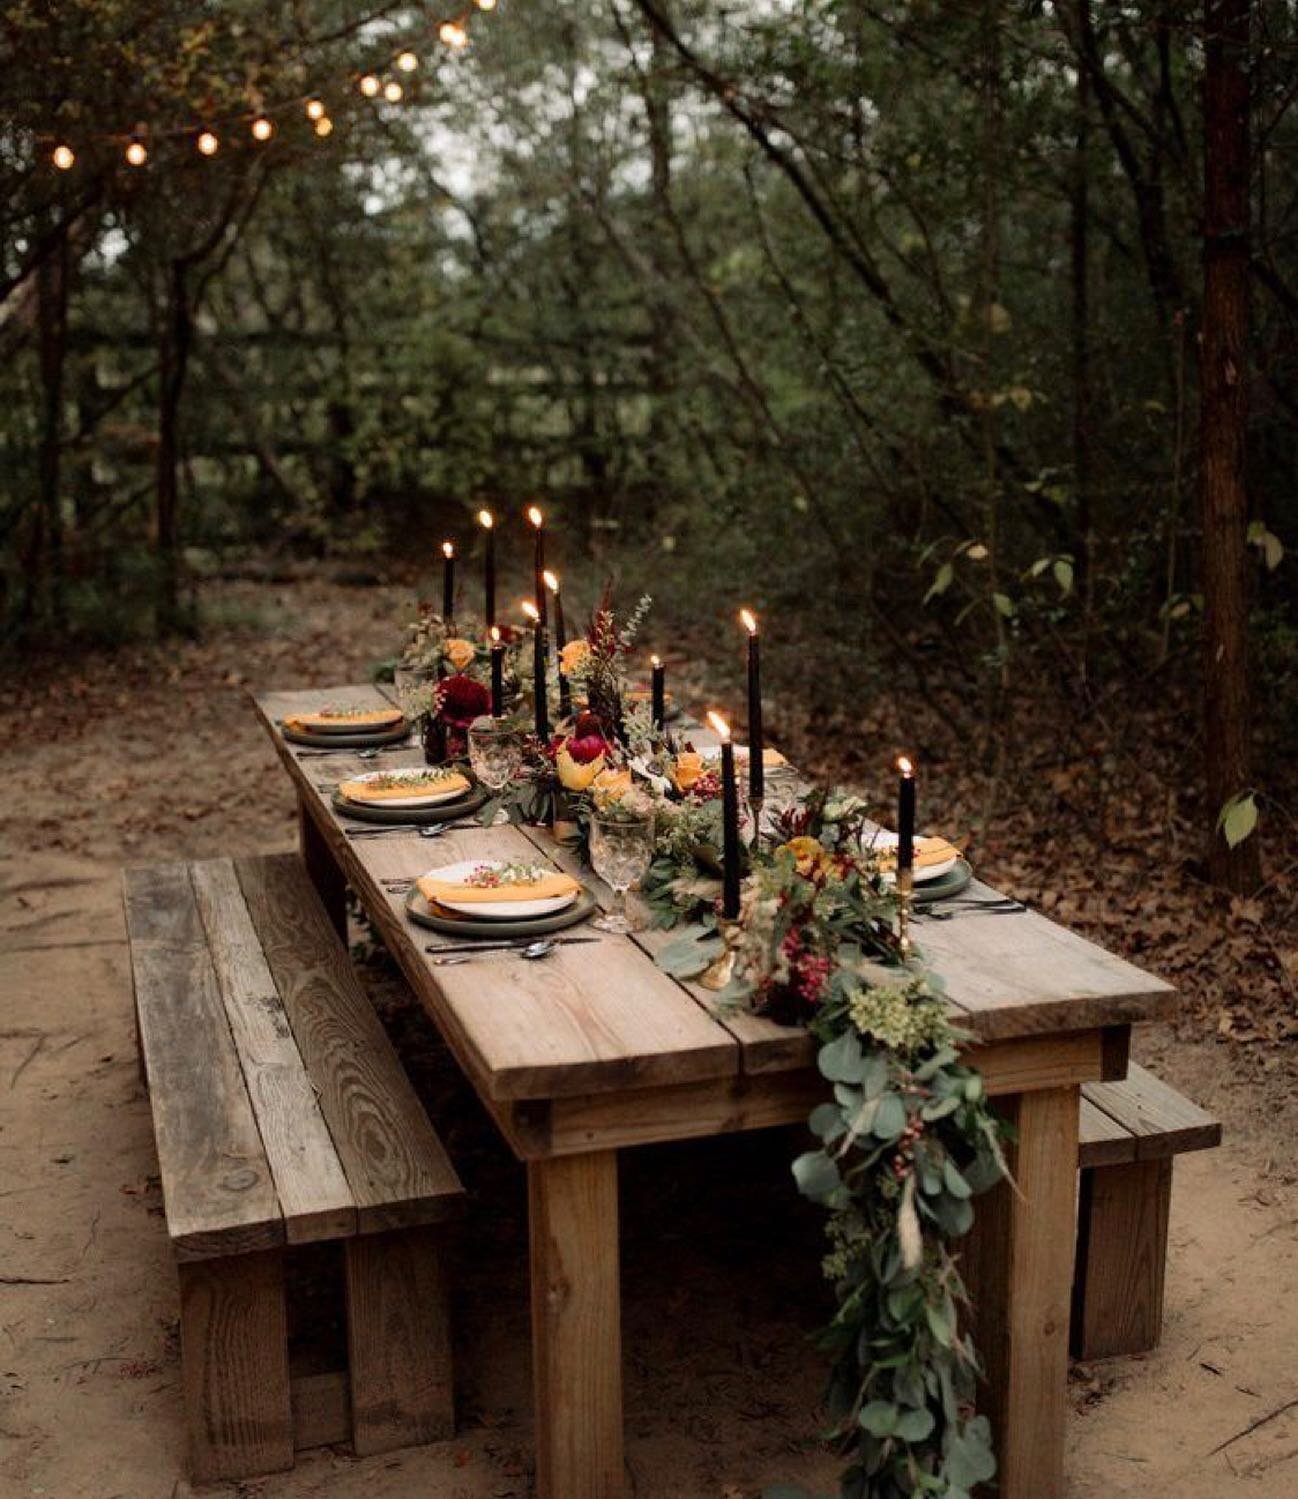 Handmade wooden tables to seat 160 guests coming soon! These pair well with our wooden chairs and all you need is a little greenery and lights ✨

Pc: Pinterest (photo for reference)